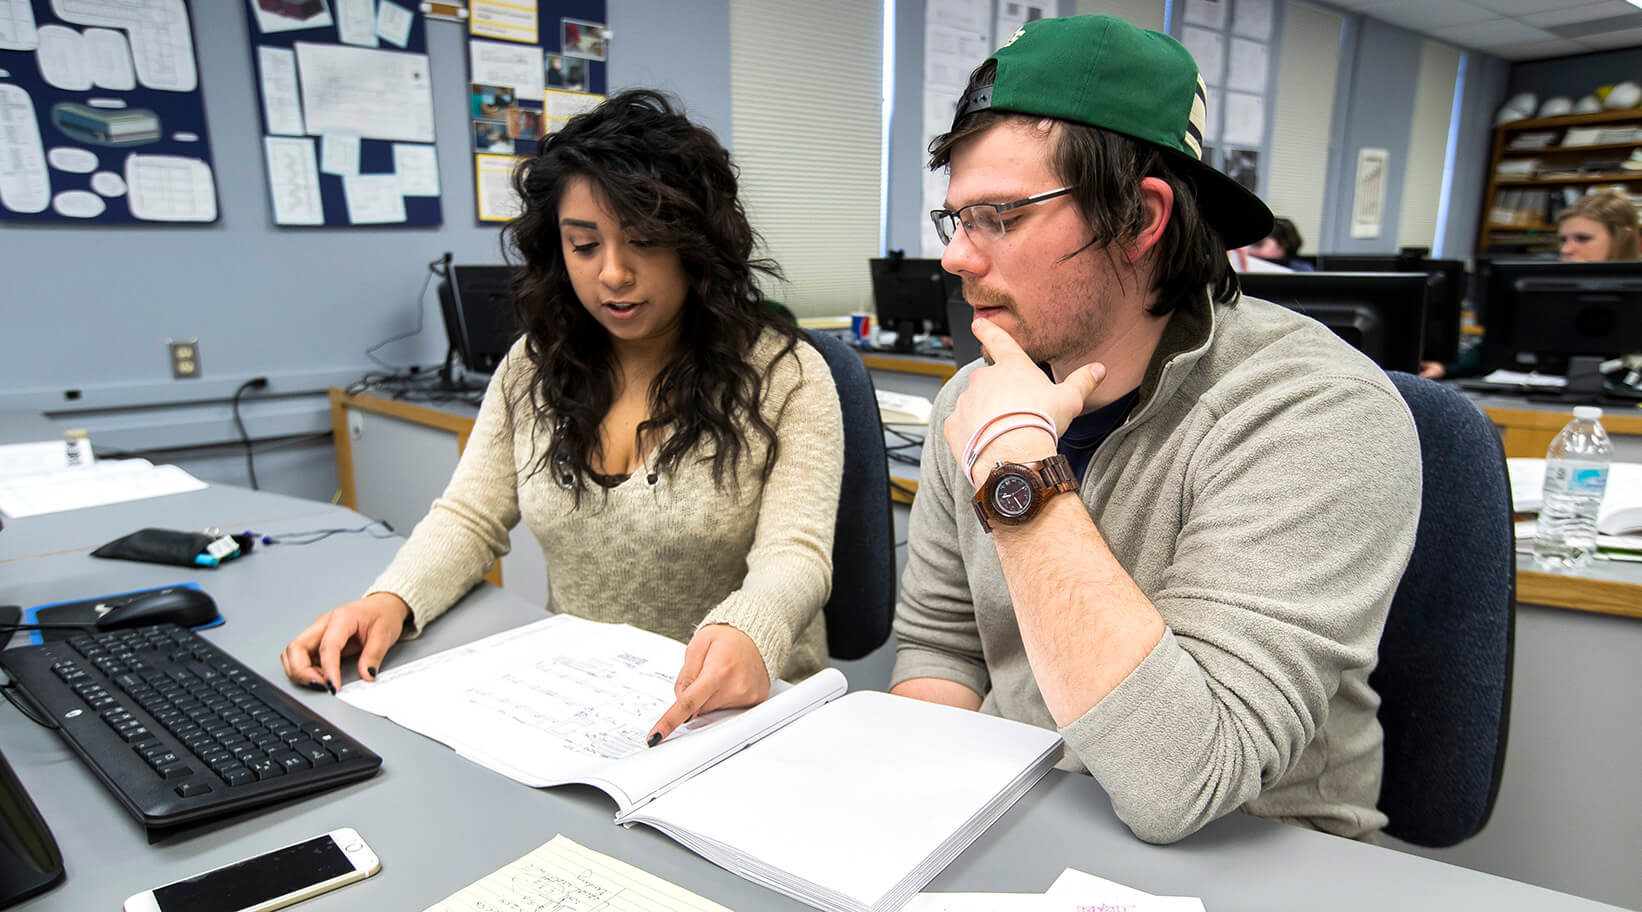 Two students looking at notes